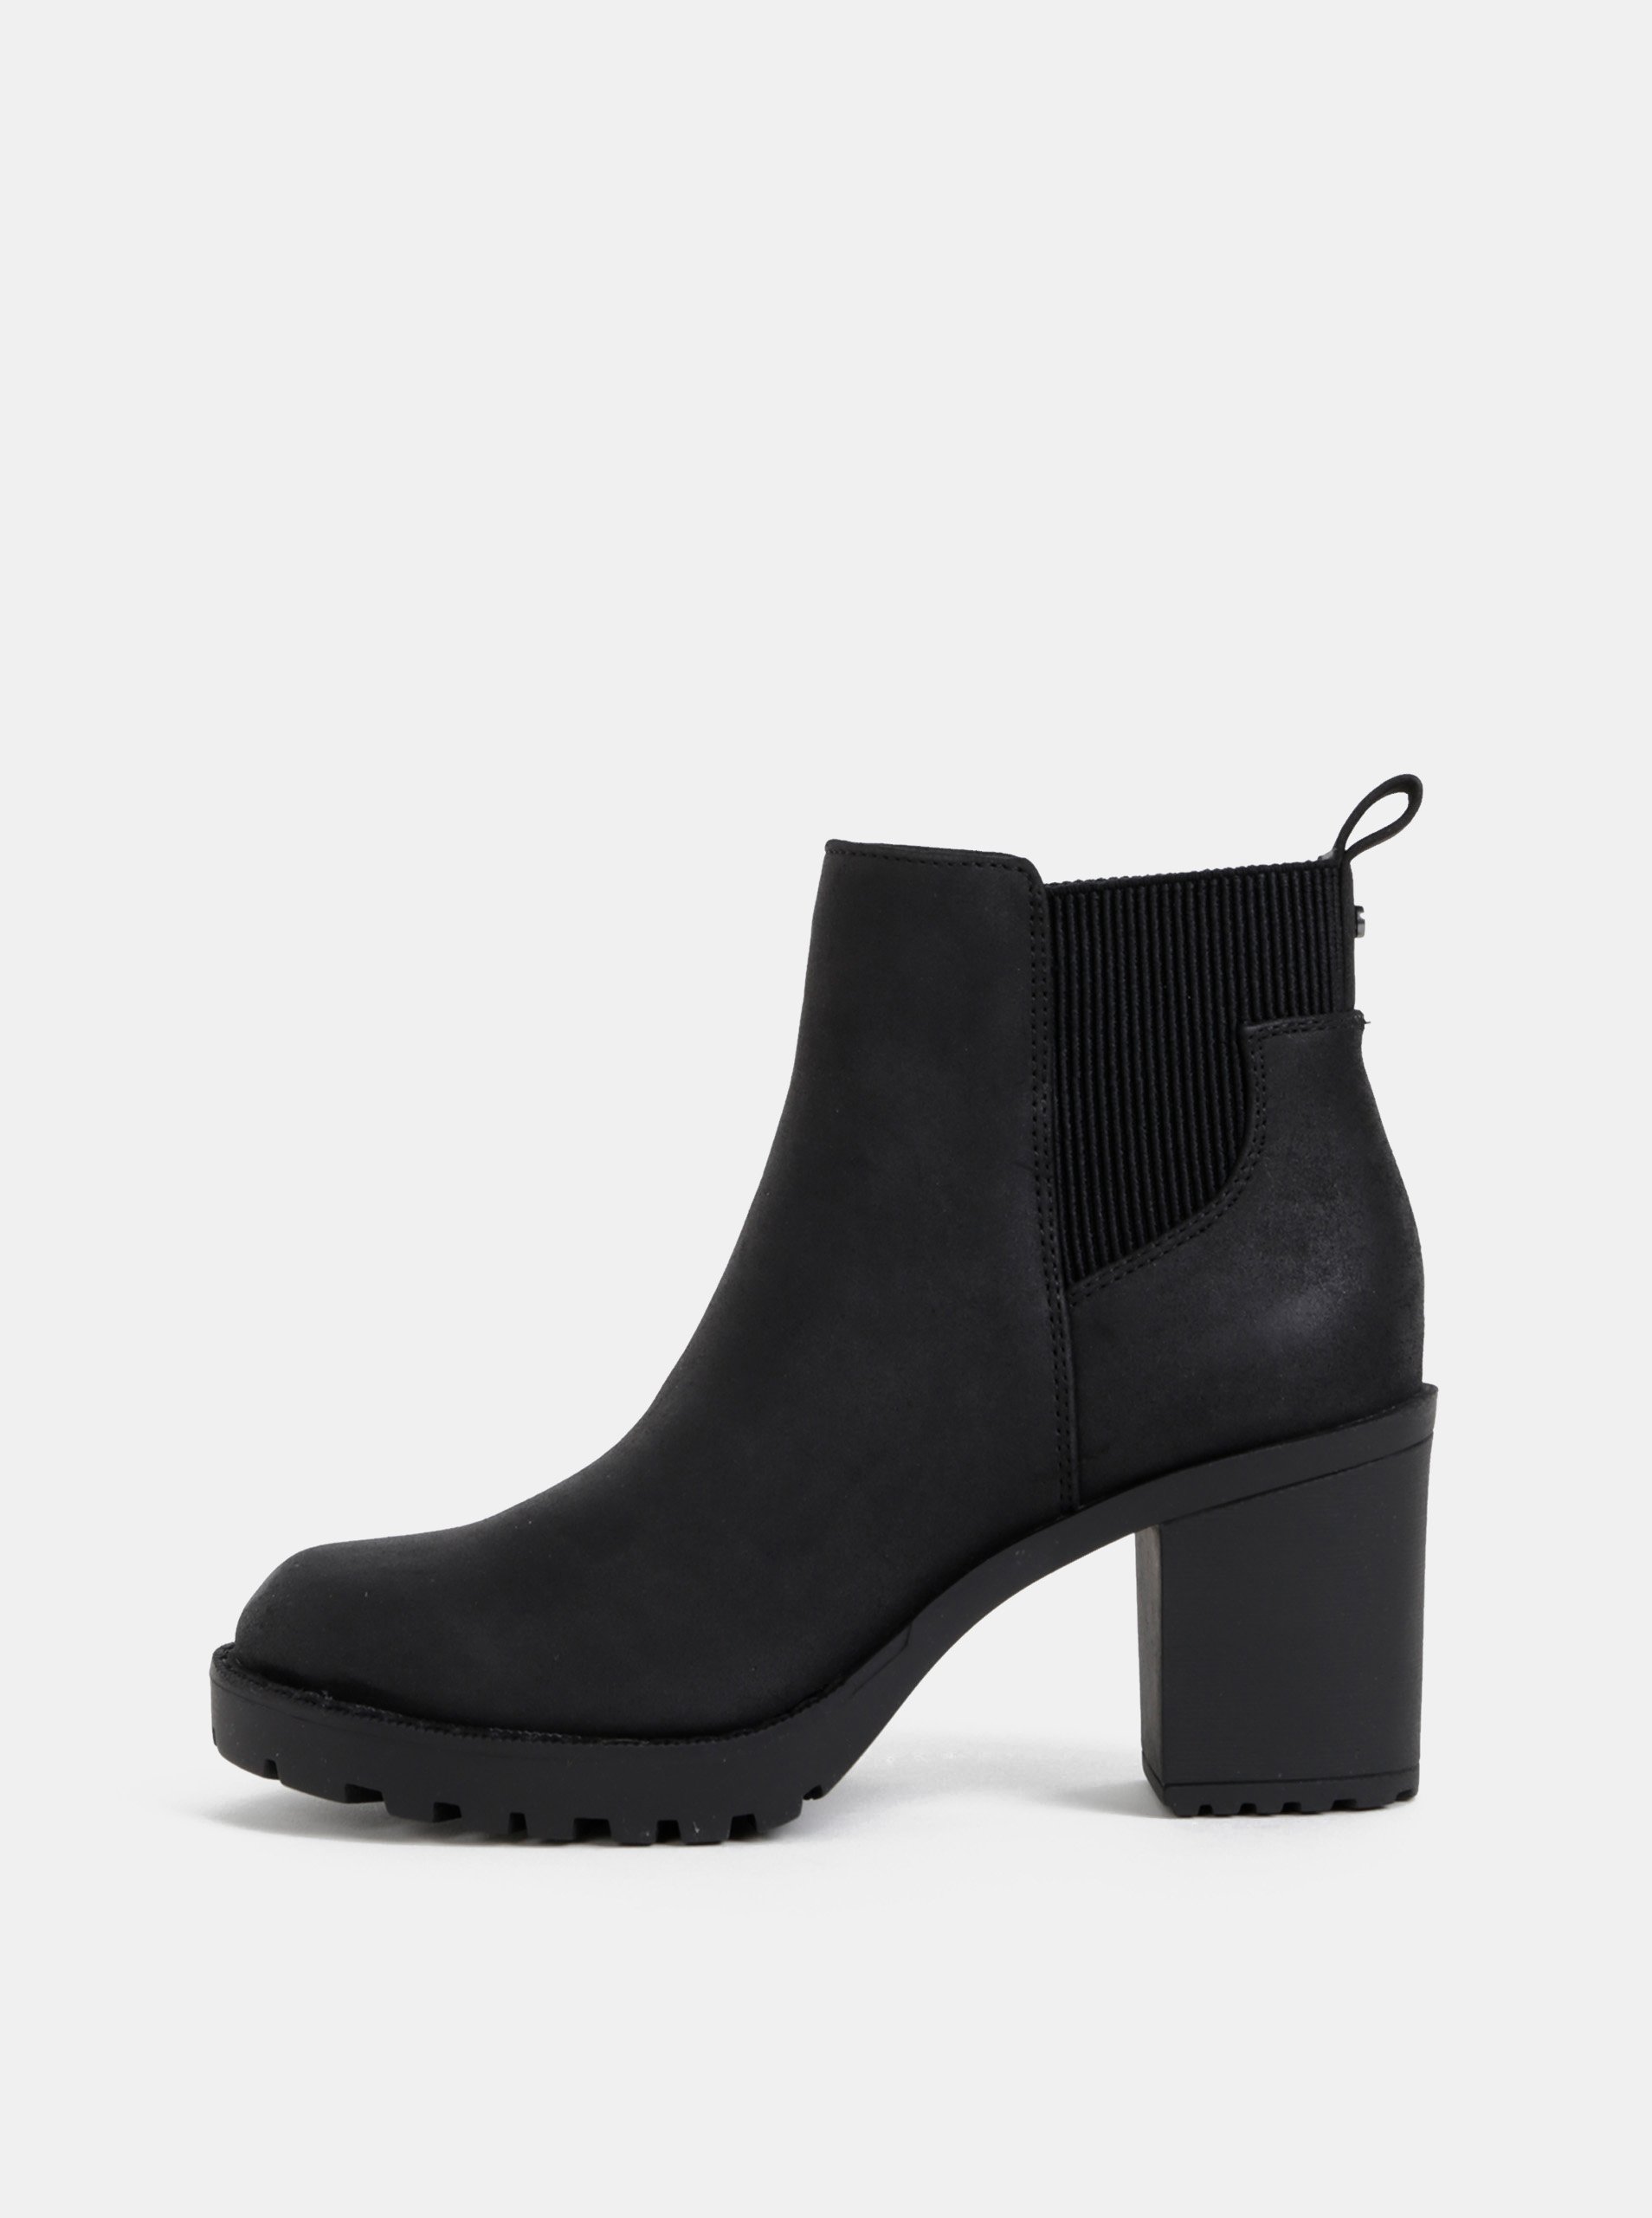 Black chelsea Shoes ONLY Barbara - Women